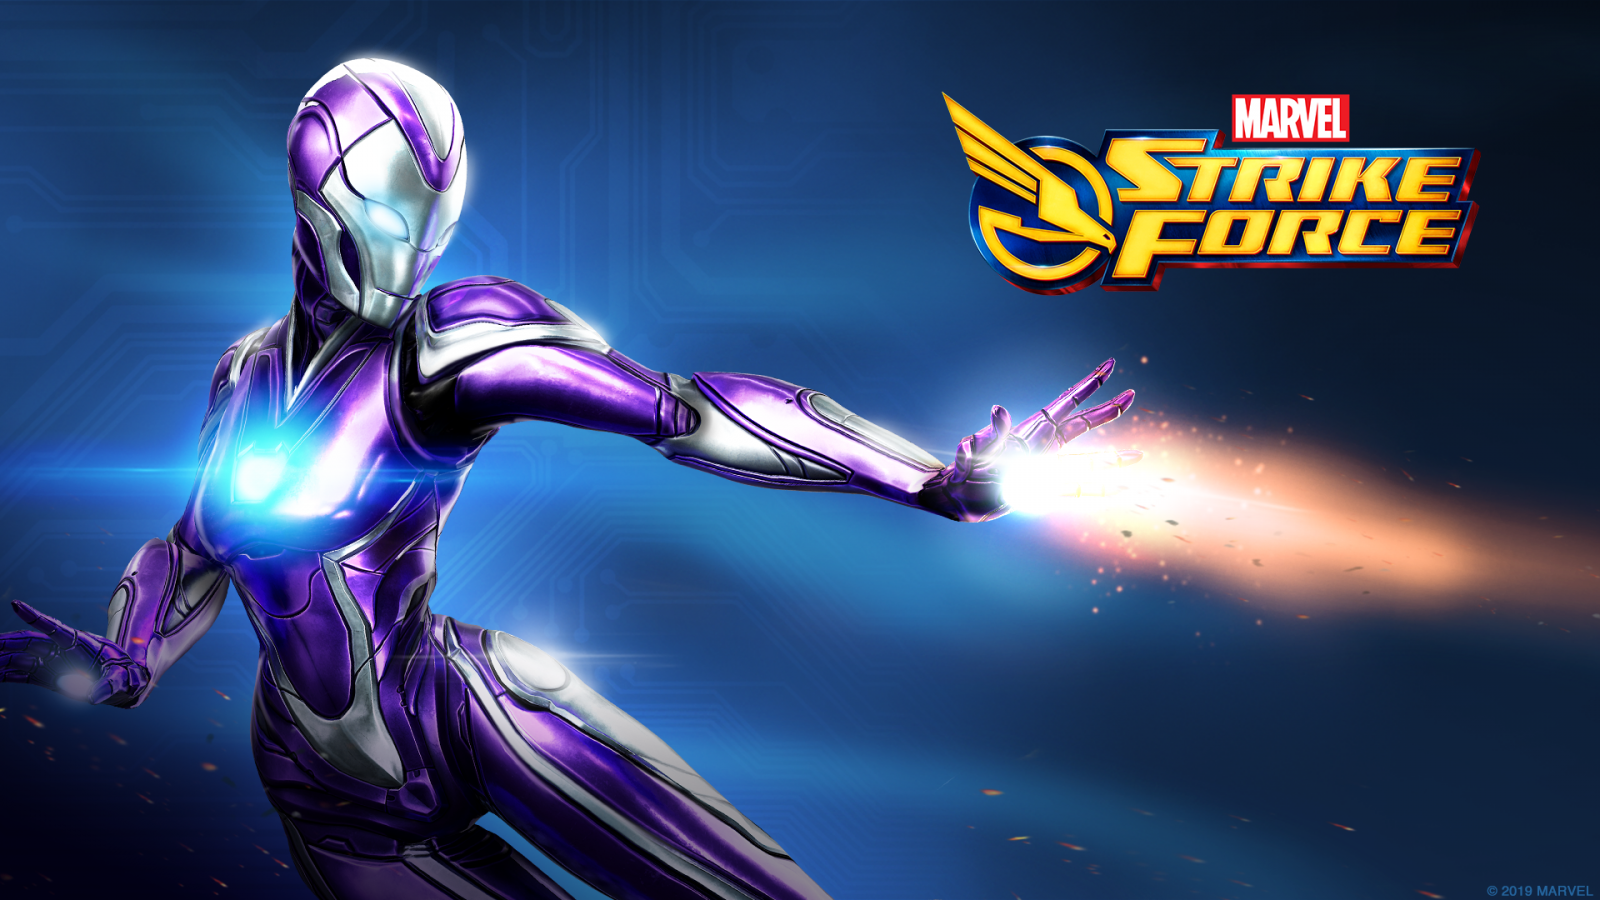 Pepper Potts (Rescue) soars into Marvel Strike Force, features defensive tactics